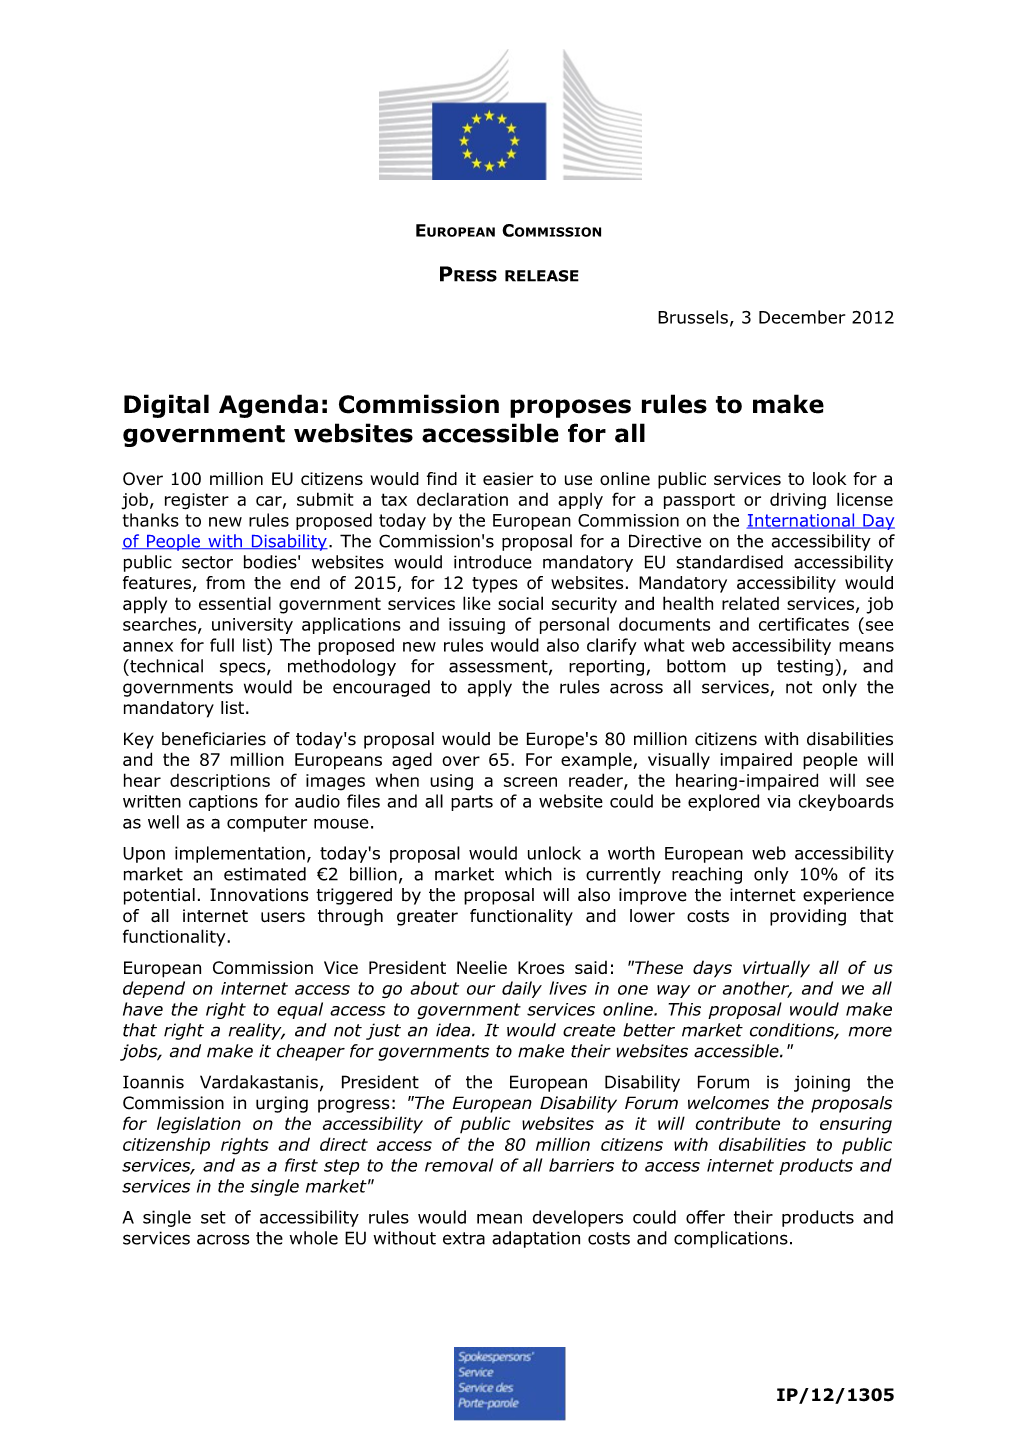 Digital Agenda: Commission Proposes Rules to Make Governmentwebsites Accessible for All